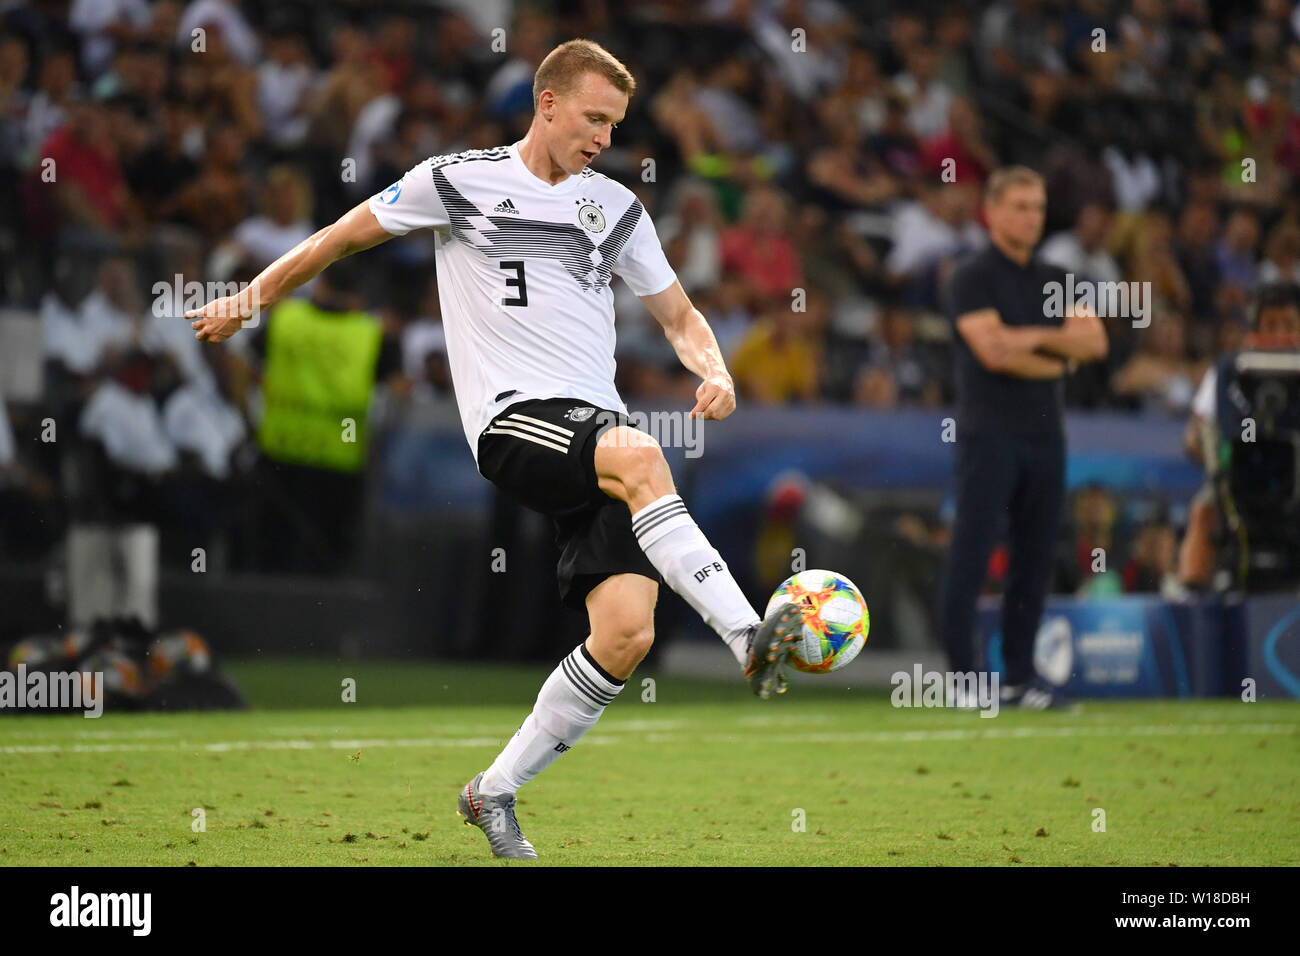 Udine, Italien. 30th June, 2019. Lukas KLOSTERMANN (GER), action, individual action, single image, cut out, full body shot, whole figure. Spain (ESP) - Germany (GER) 2-1, at 30.06.2019 Stadio Friuli Udine. Football U-21, FINALE UEFA Under21 European Championship in Italy/SanMarino from 16.-30.06.2019. | Usage worldwide Credit: dpa/Alamy Live News Stock Photo